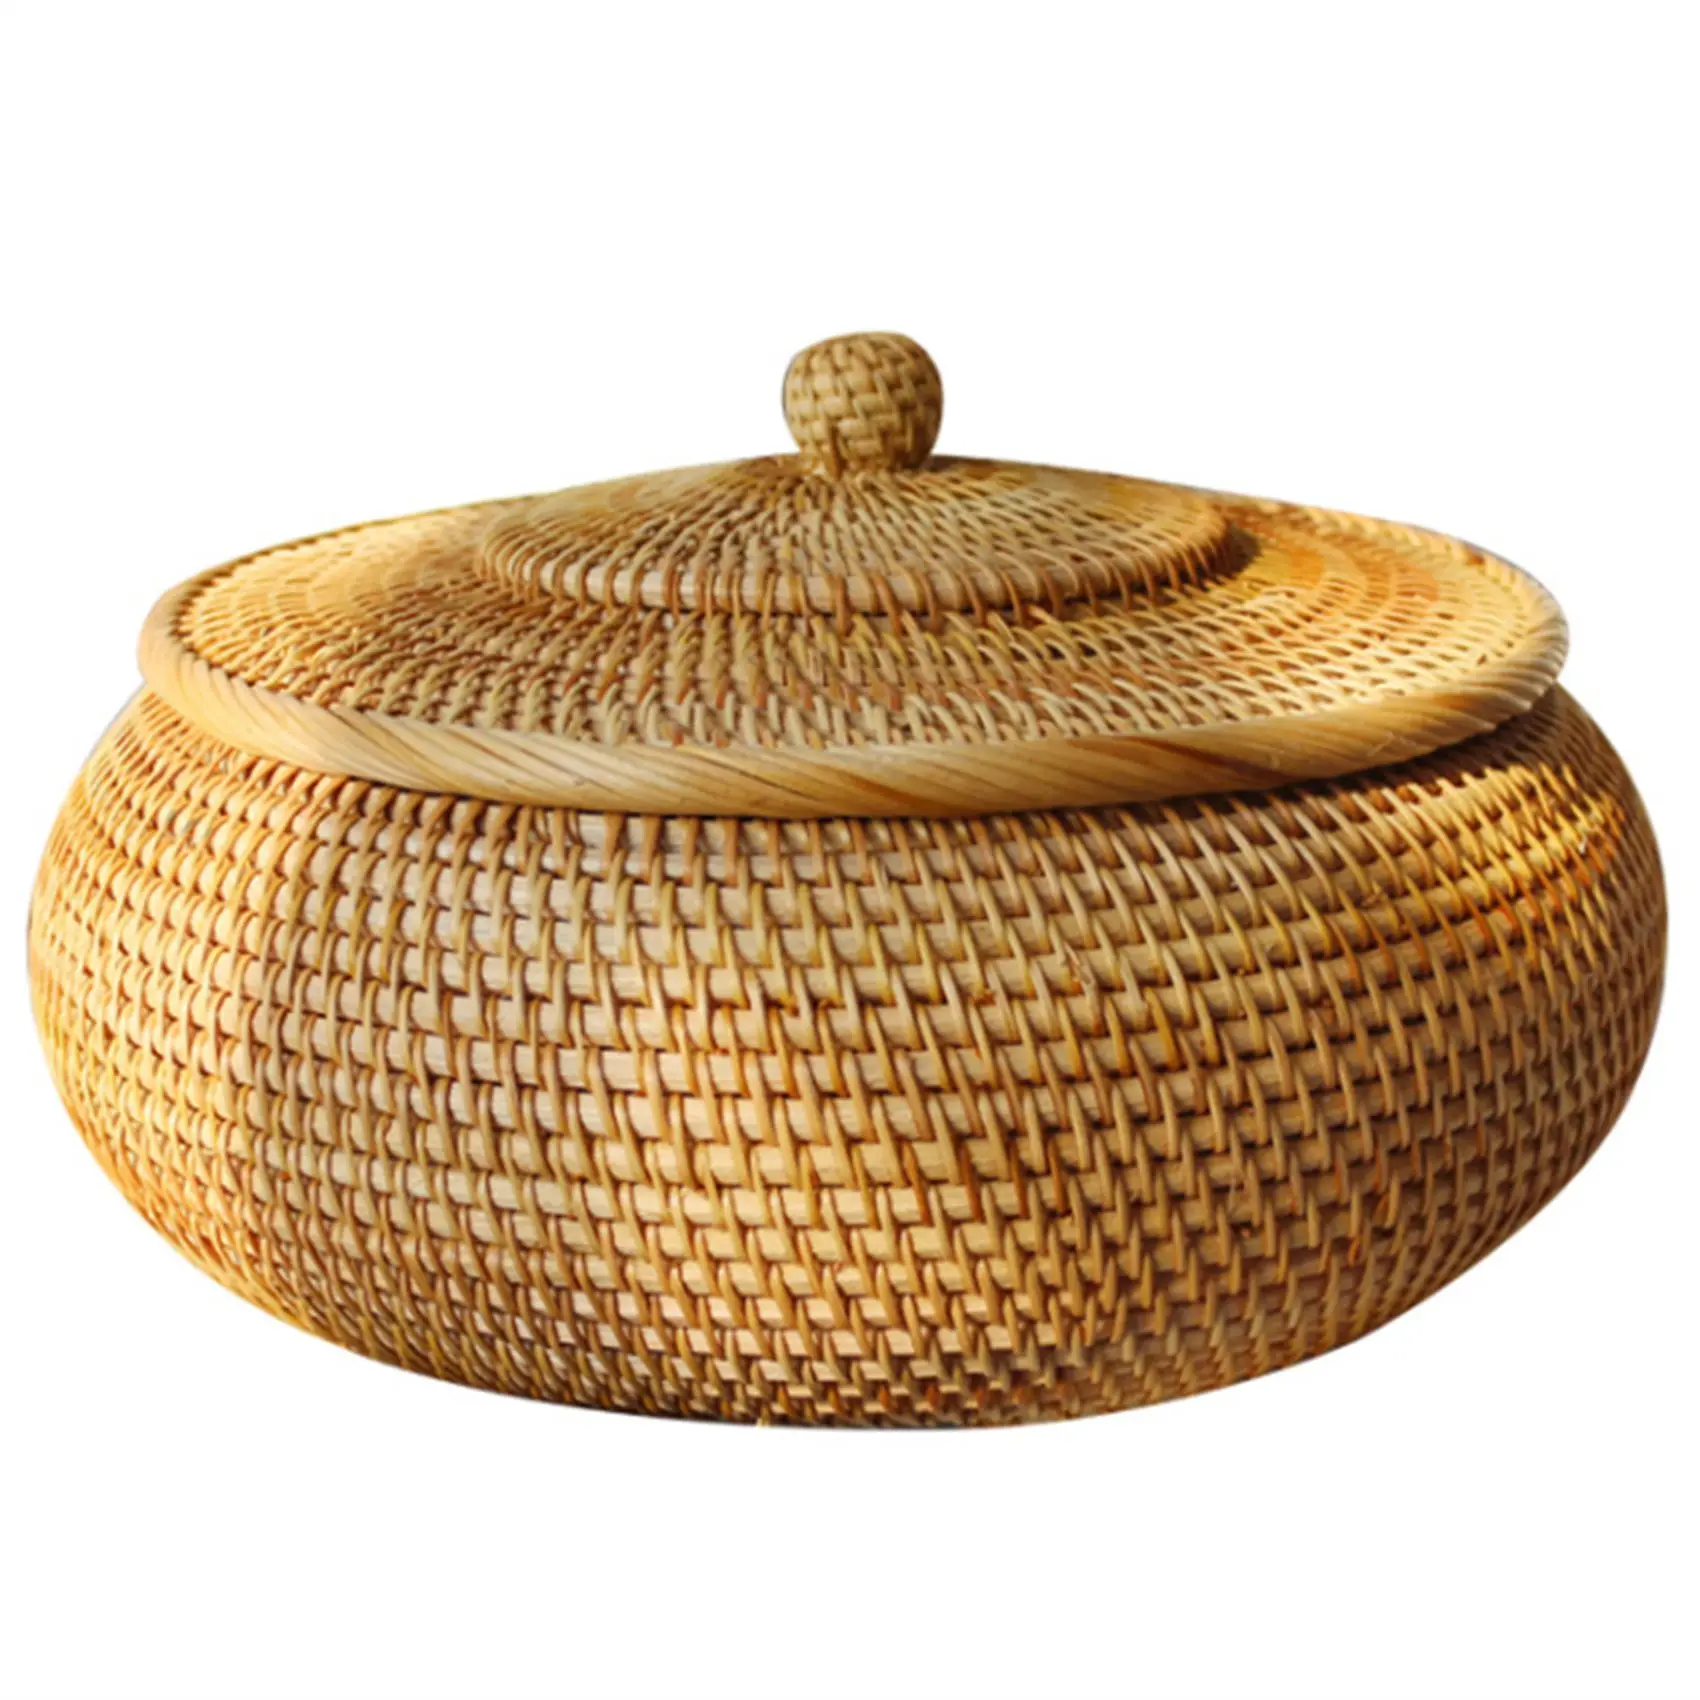 

Round Rattan Box Wicker Fruit Basket with Lid Bread Basket Tray Storage Basket Willow Woven Basket for Bread Snack